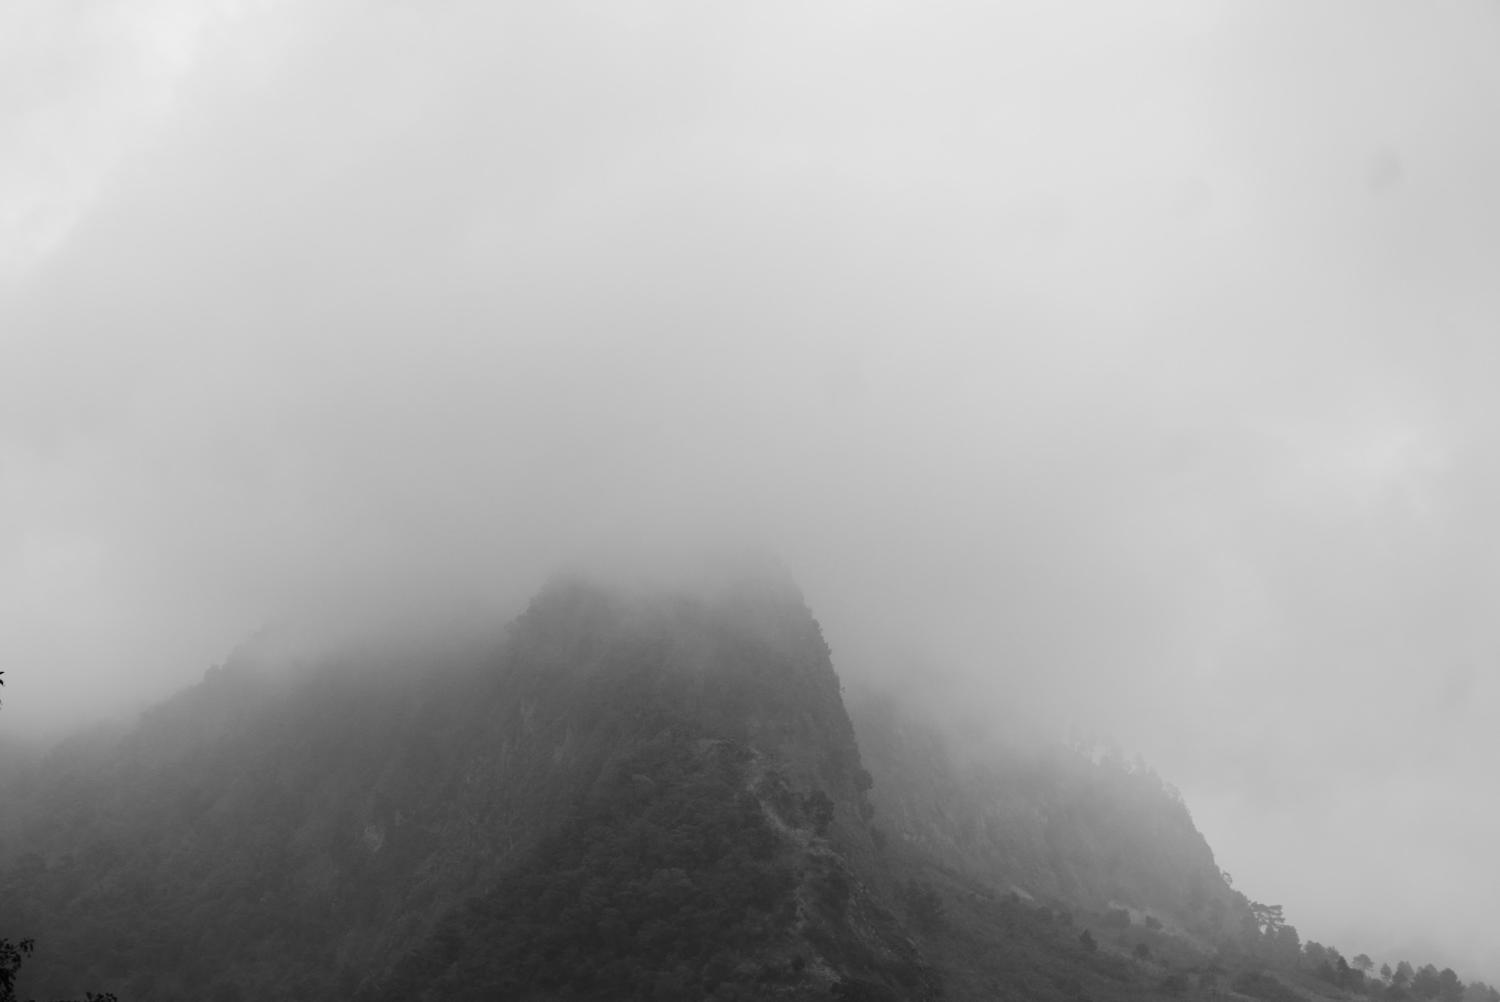 Dreamscapes. Fog surrounding the mountains on the first day of the hike to Lake Atitlan